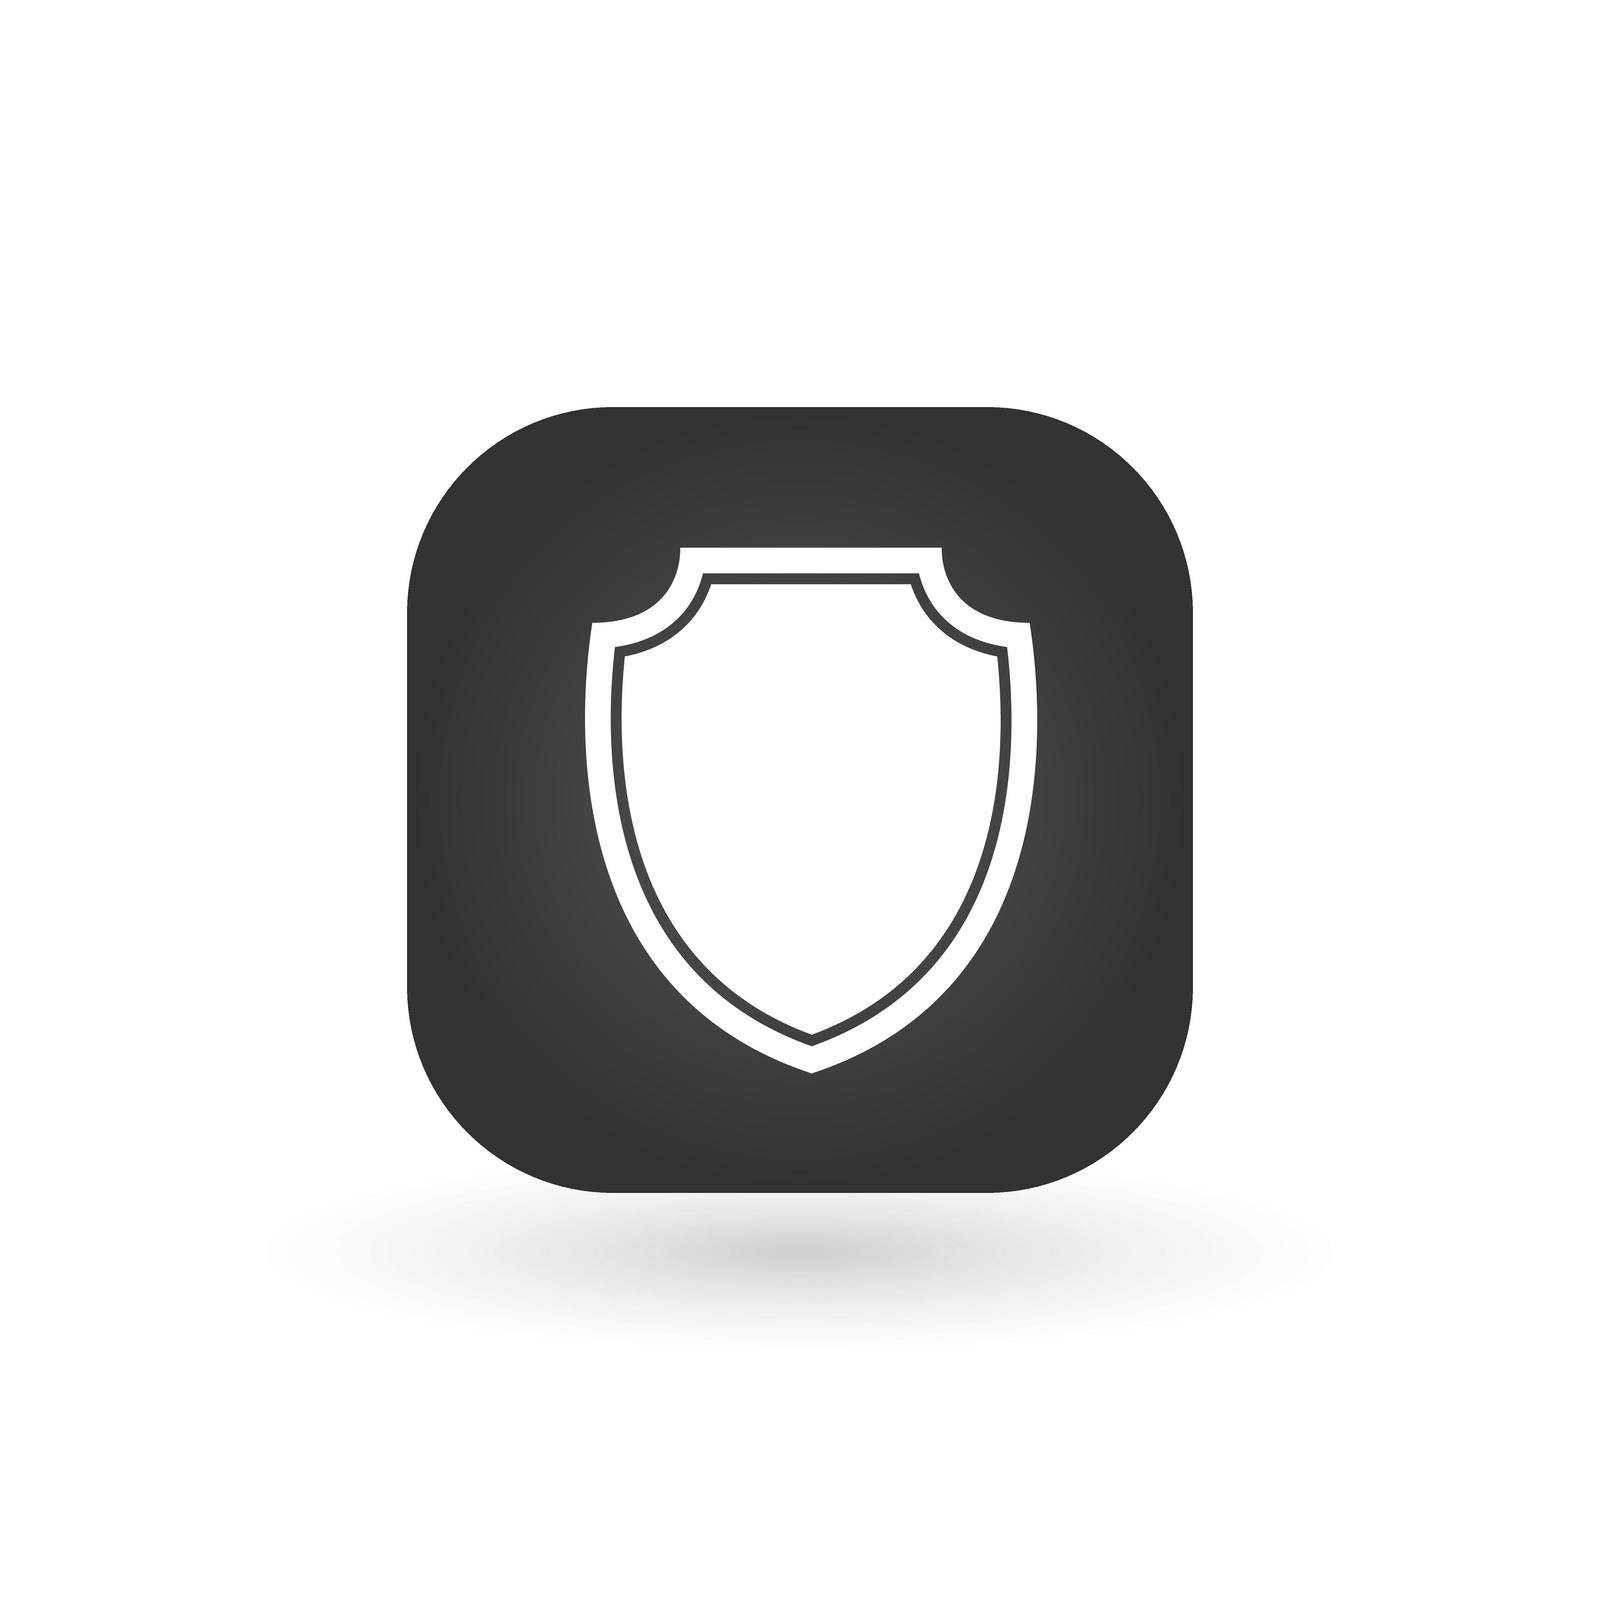 Guardian shield app icon, protection icon in flat style. Vector illustration isolated on white background. by Kyrylov